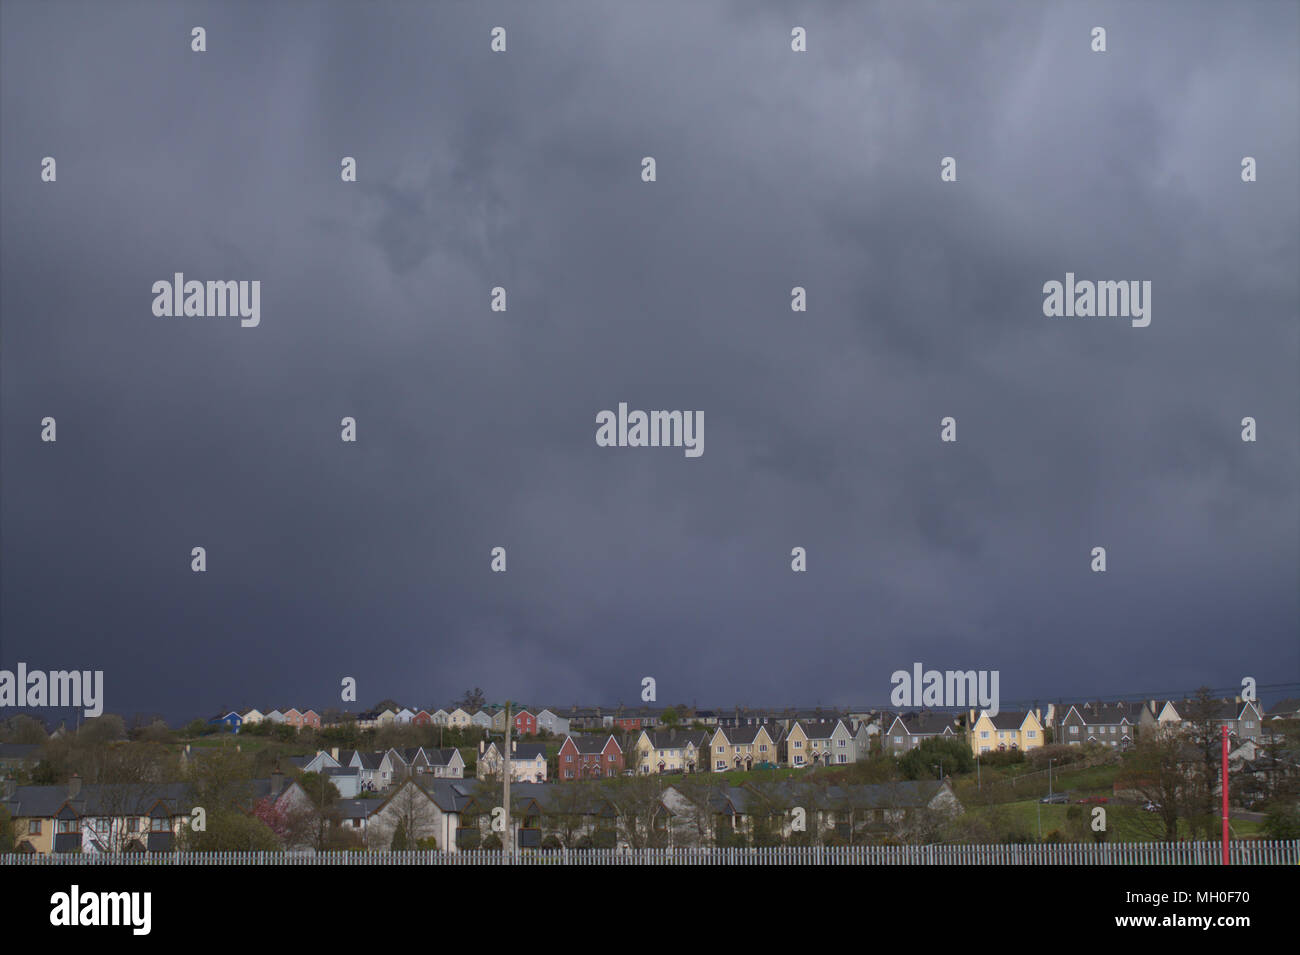 Heavy dark storm clouds gathering over the brightly painted houses on the ridge above a small town in county cork, ireland. Stock Photo